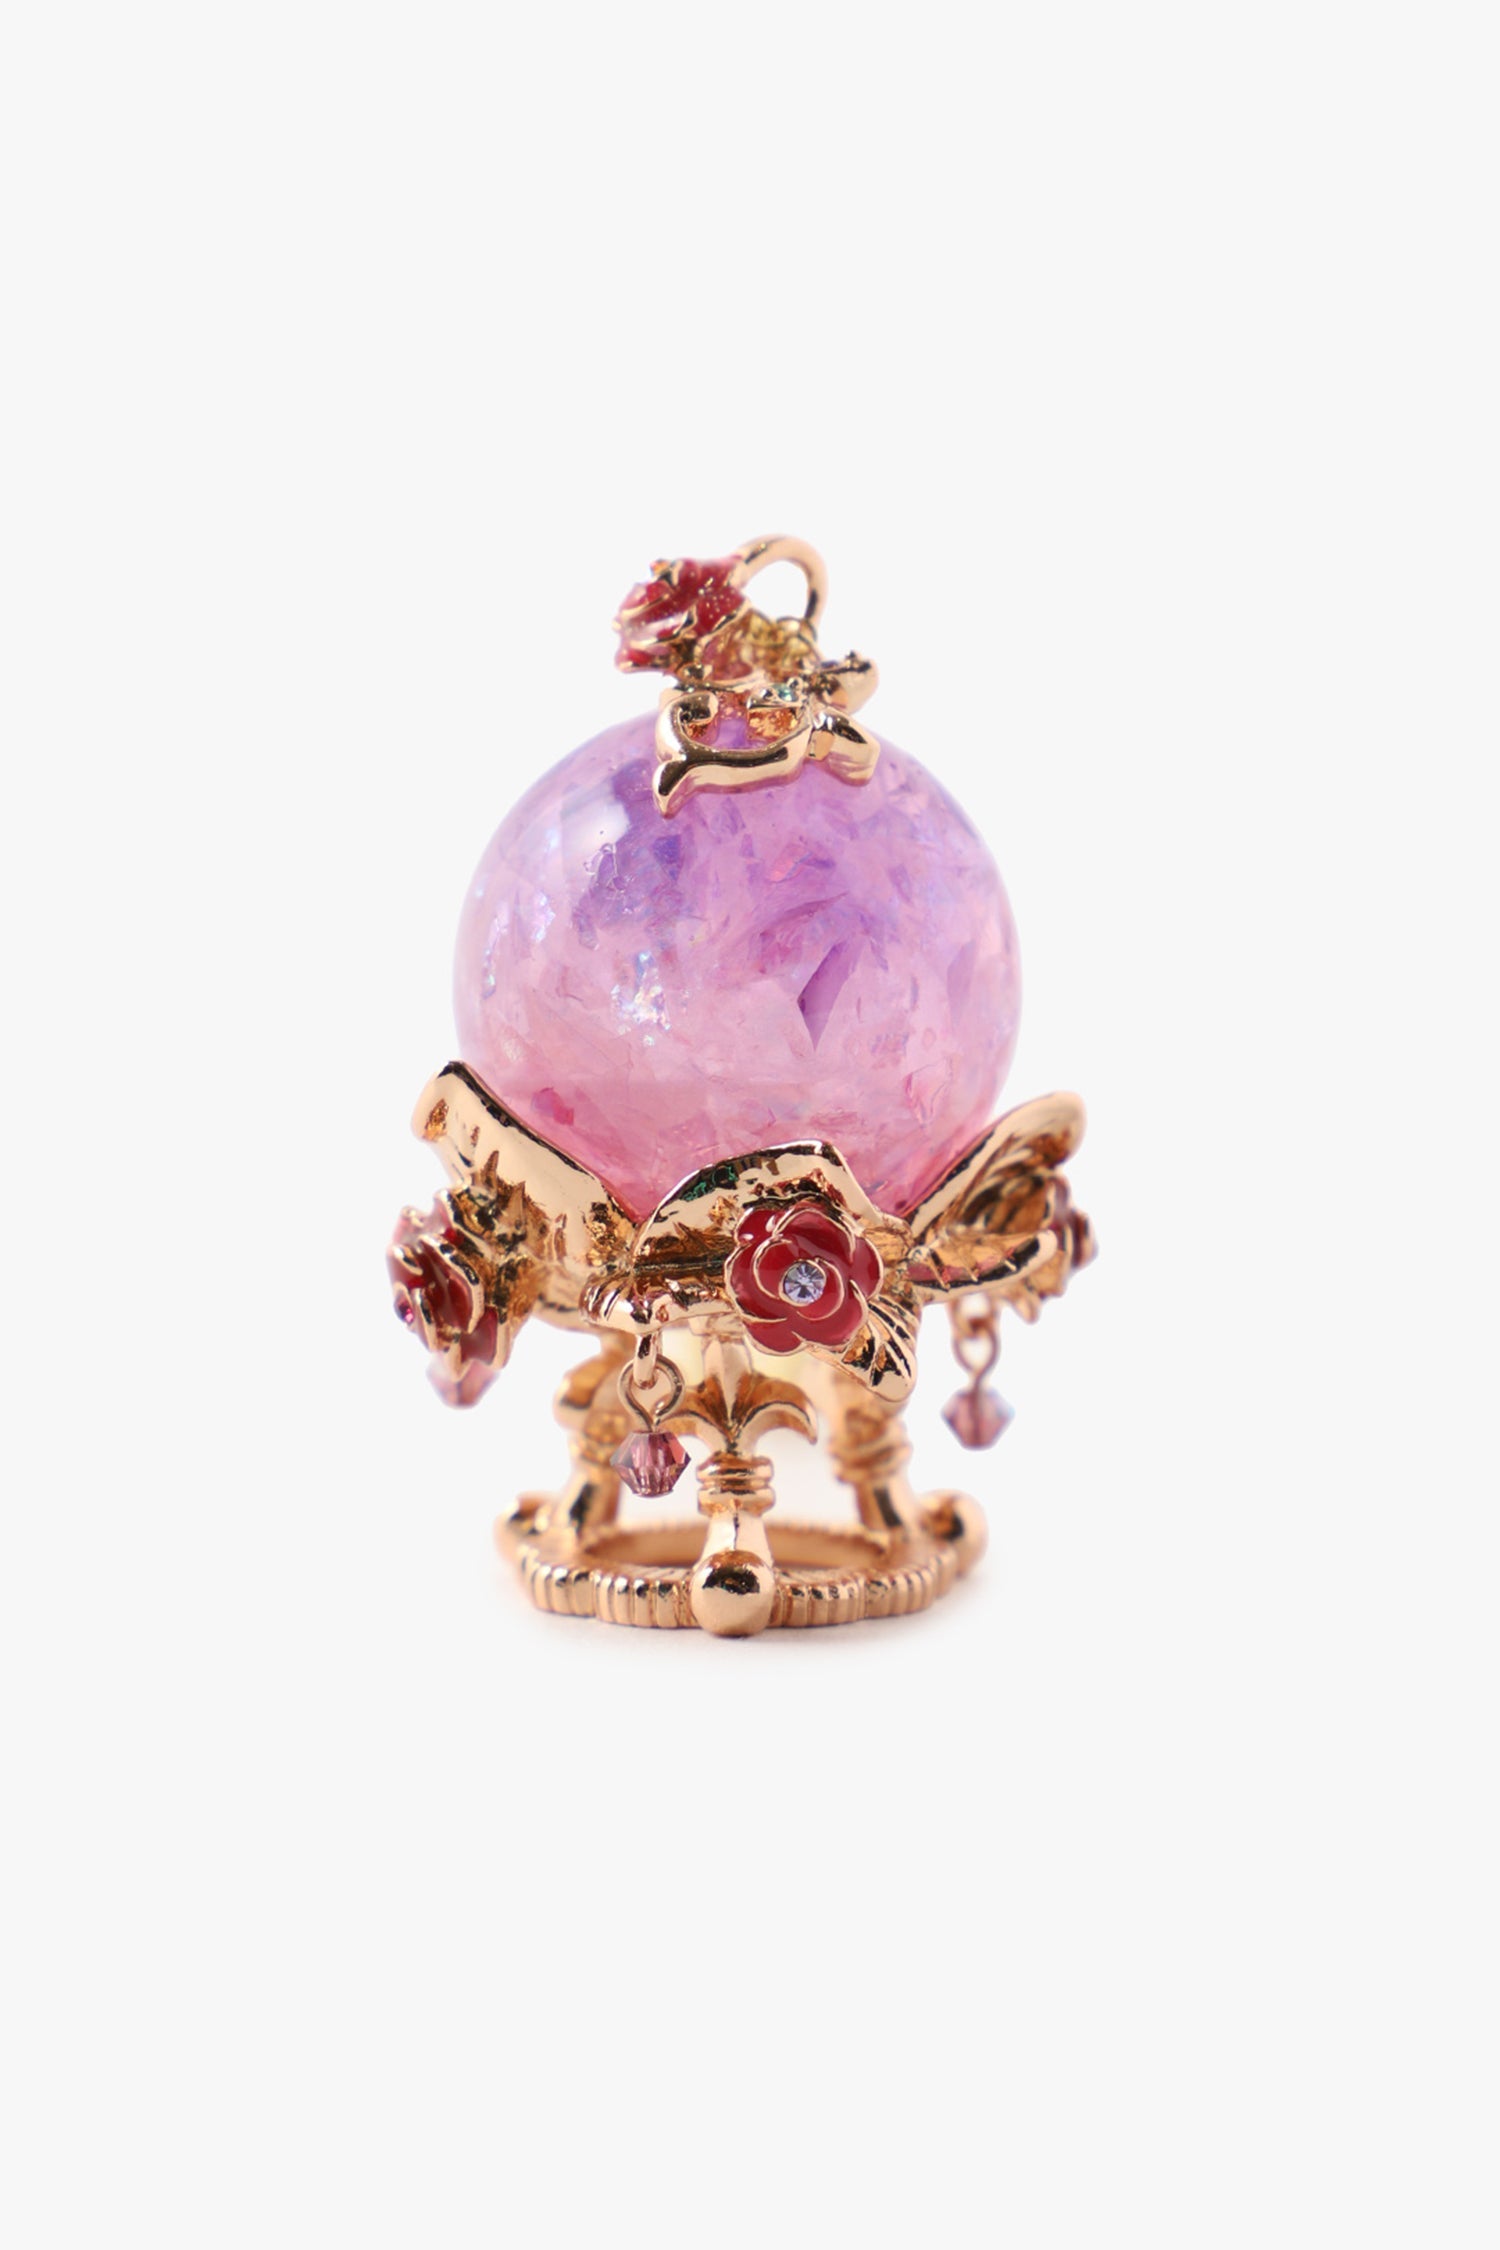 Pendant, Pink crystal ball with silver accents, a golden floral design  support the ball